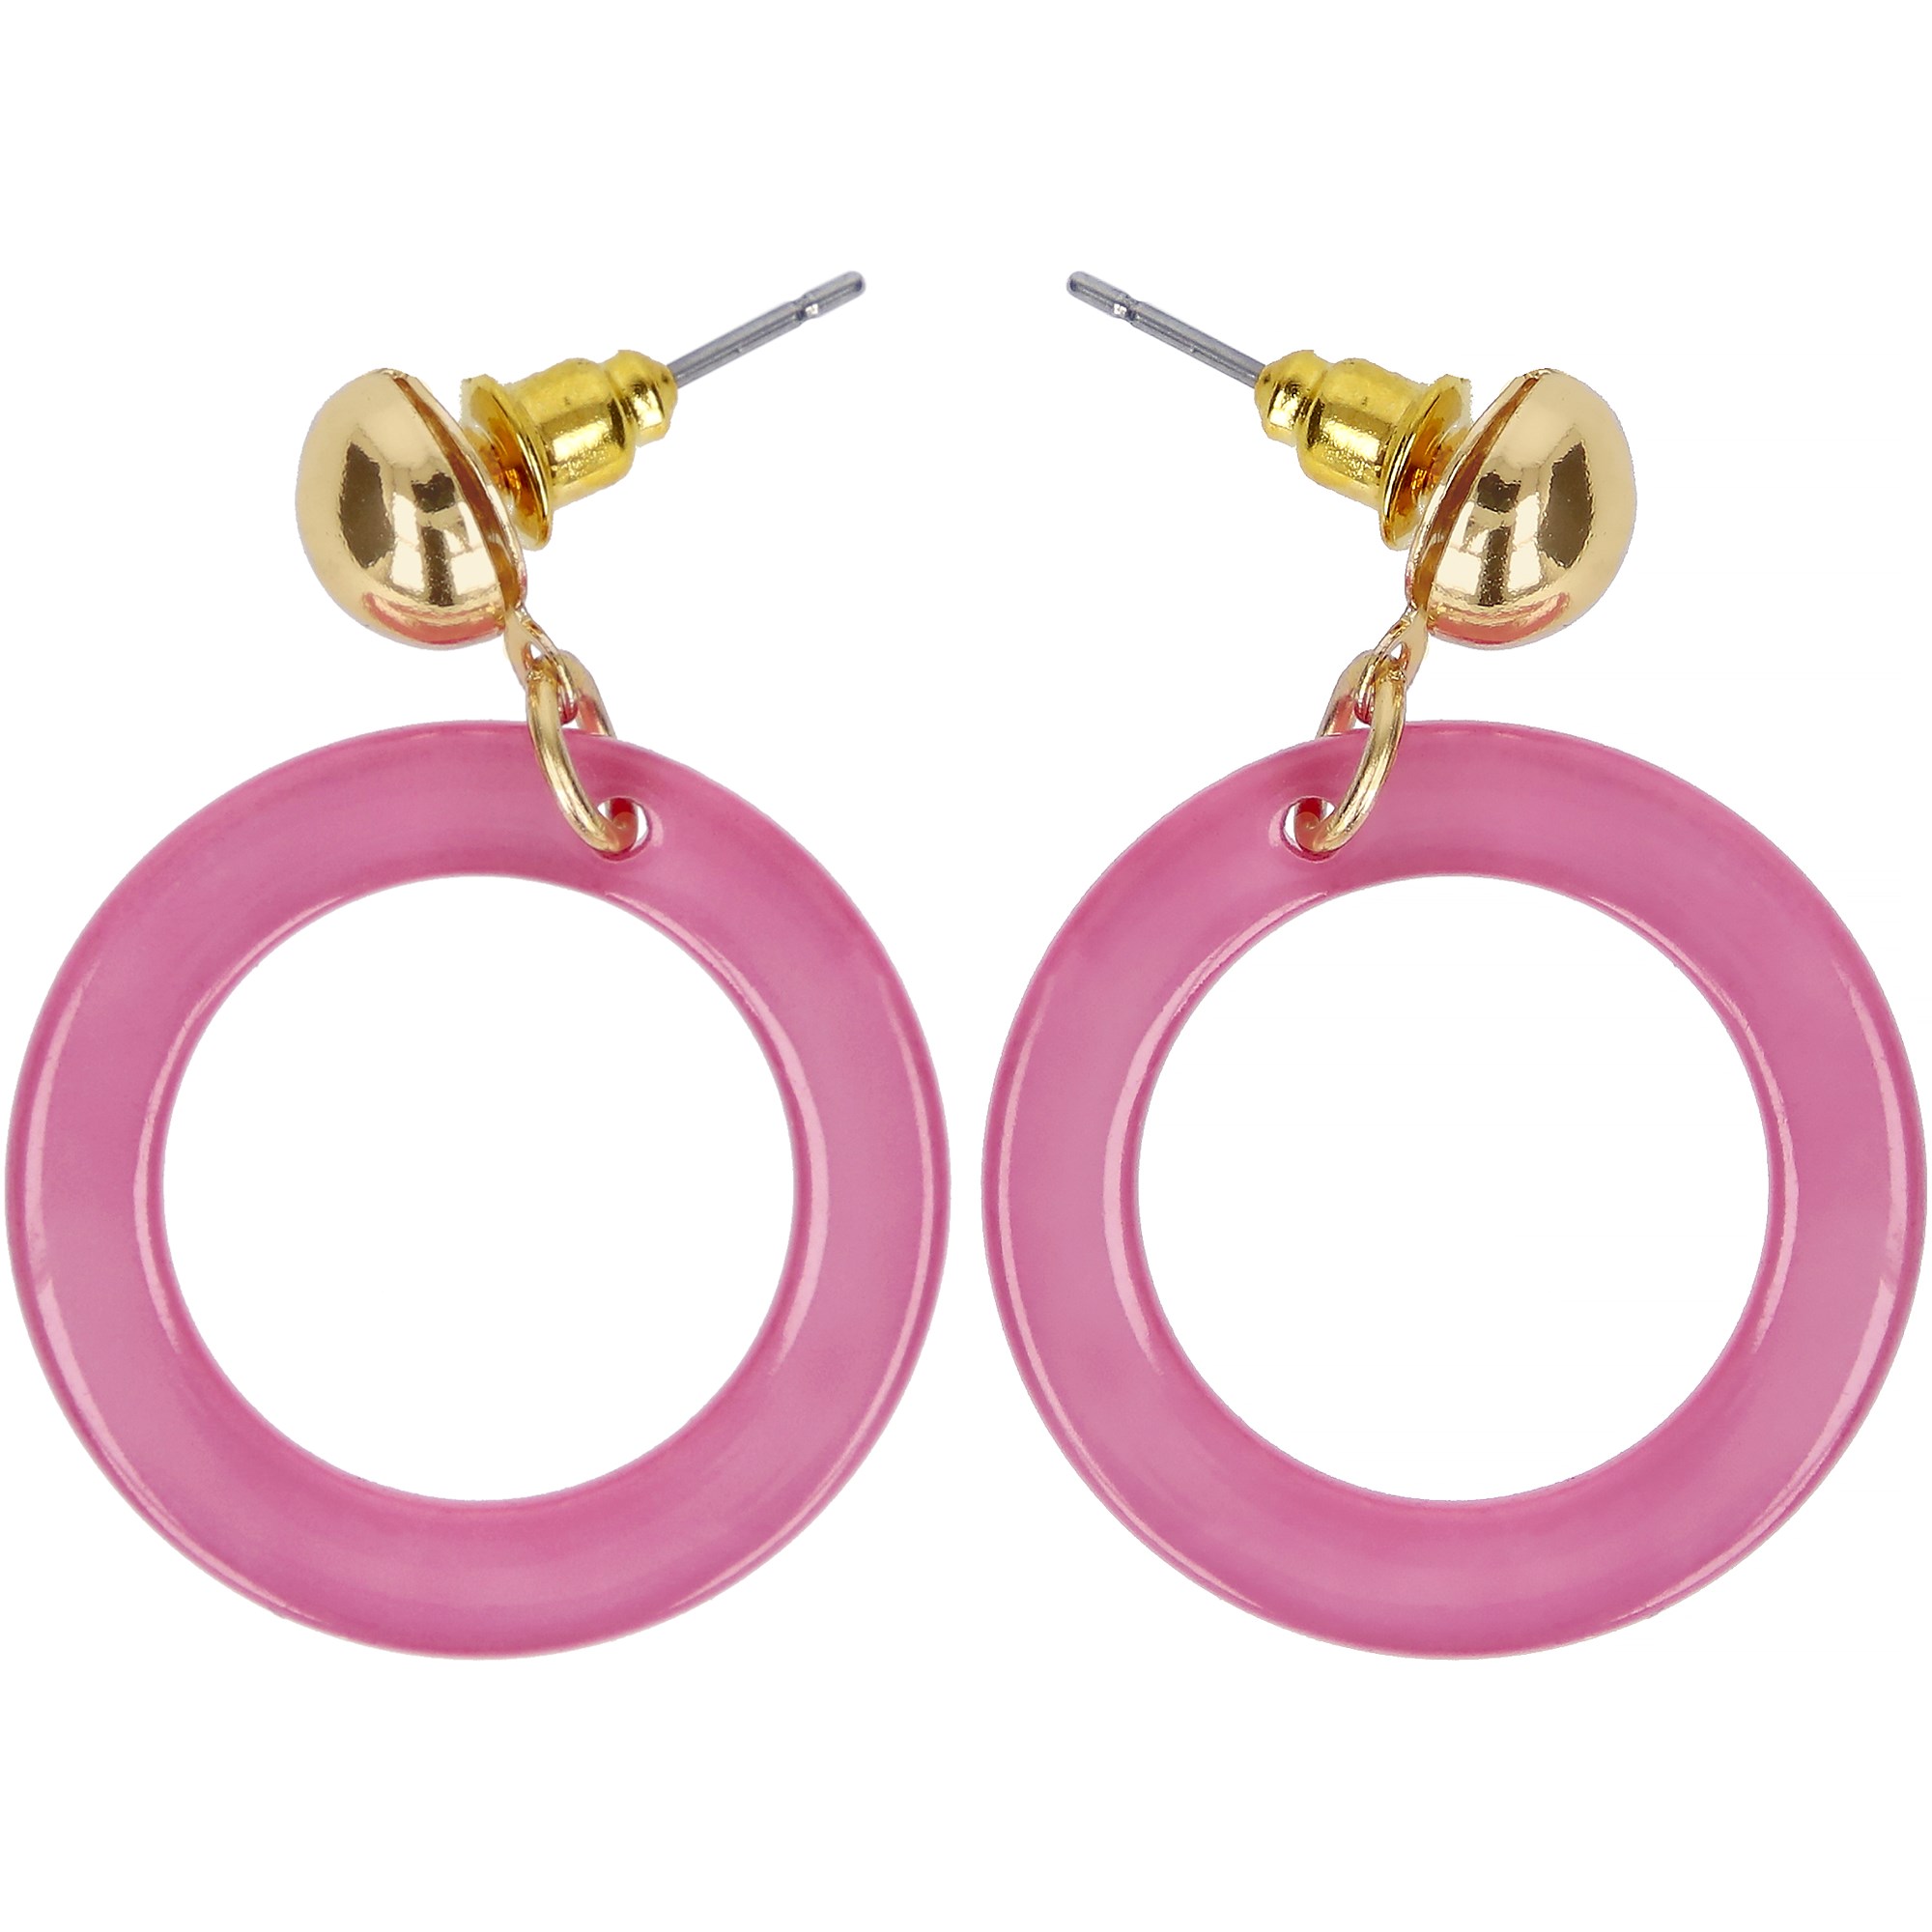 Dazzling Earrings Gold Stud With Pink Plastic